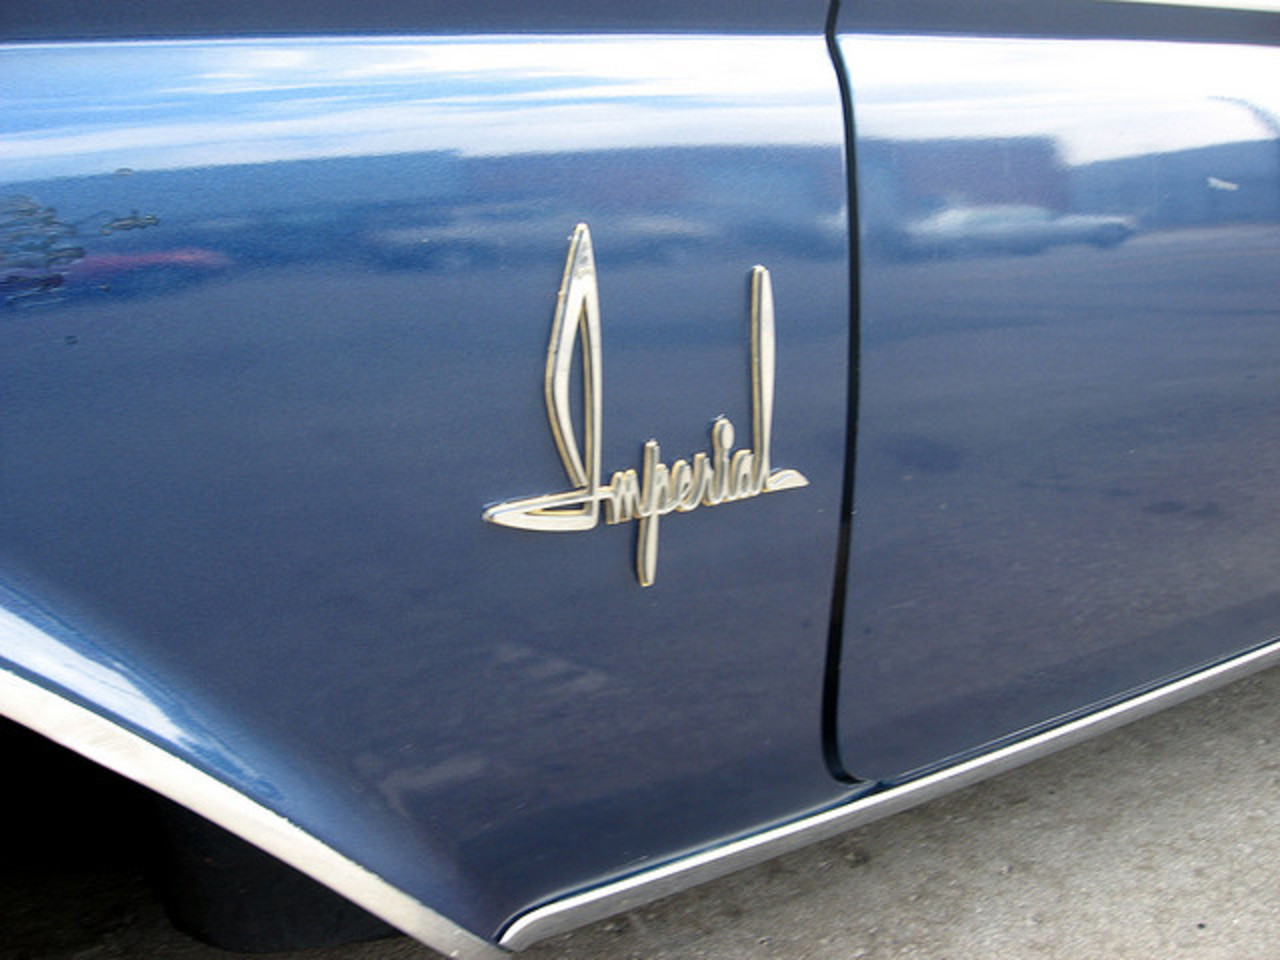 1962 Imperial Crown Southampton coupe badge | Flickr - Photo Sharing!